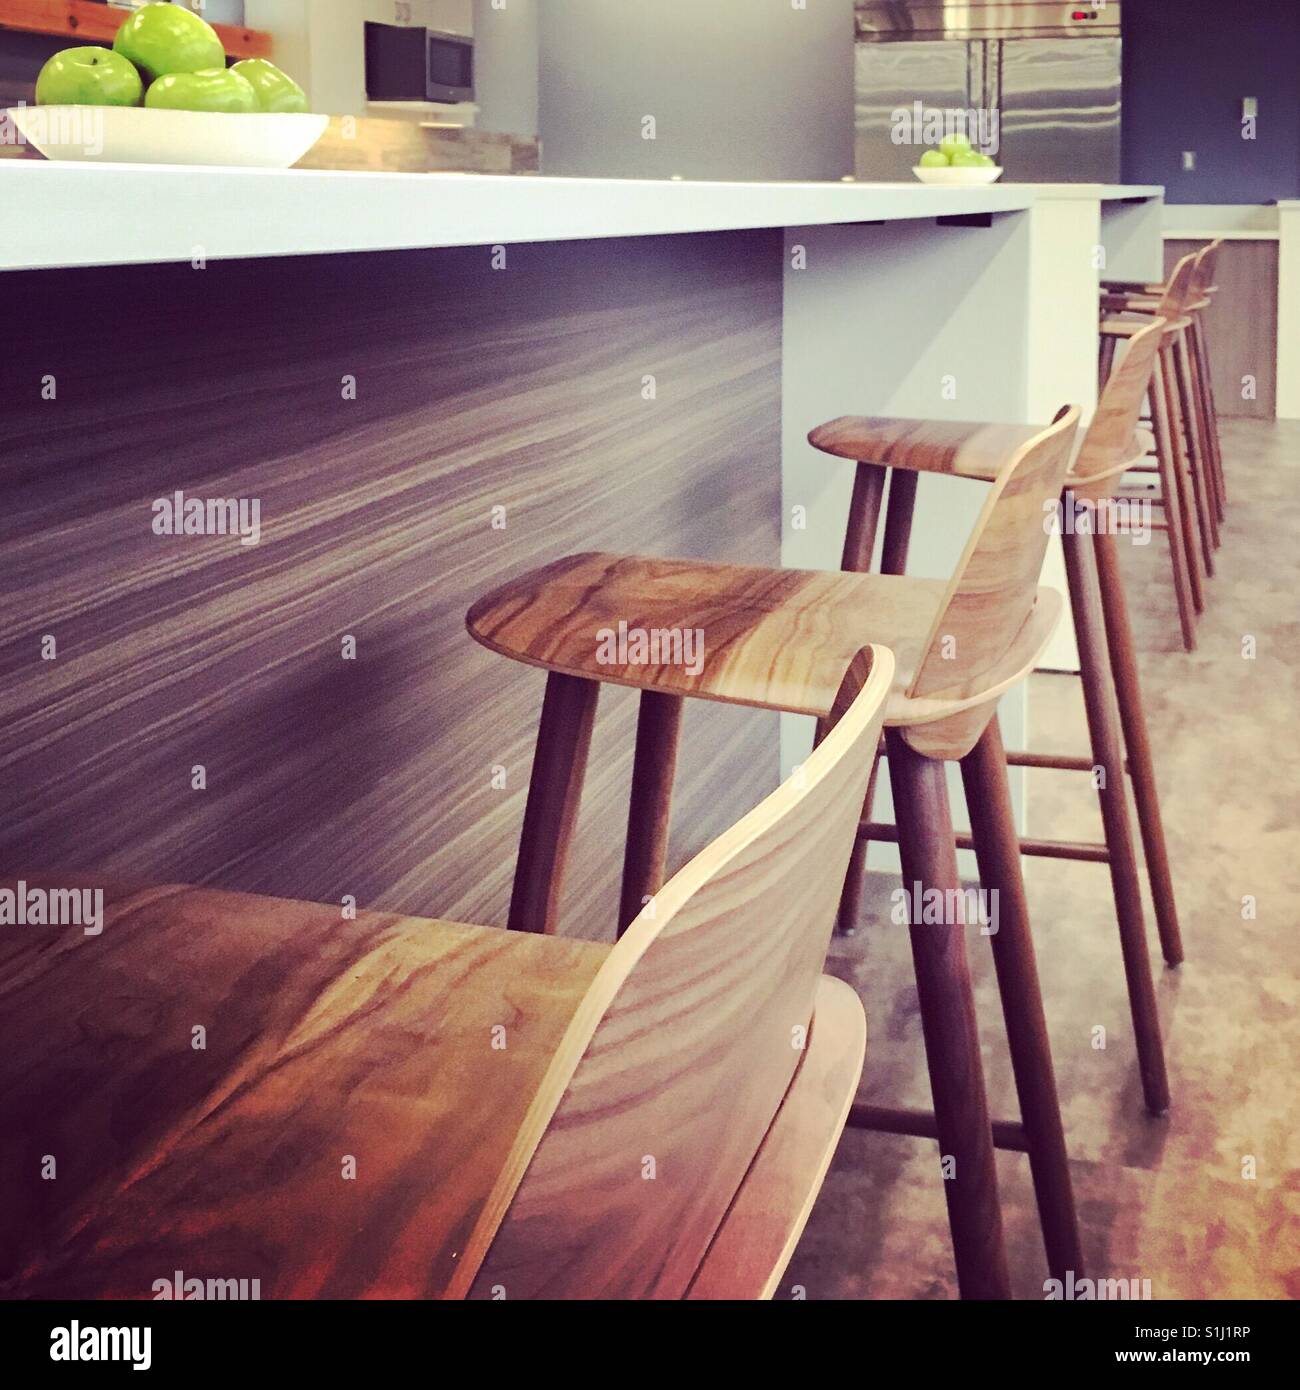 Office space cafeteria renovation featuring bar stools at a cafe counter. Stock Photo